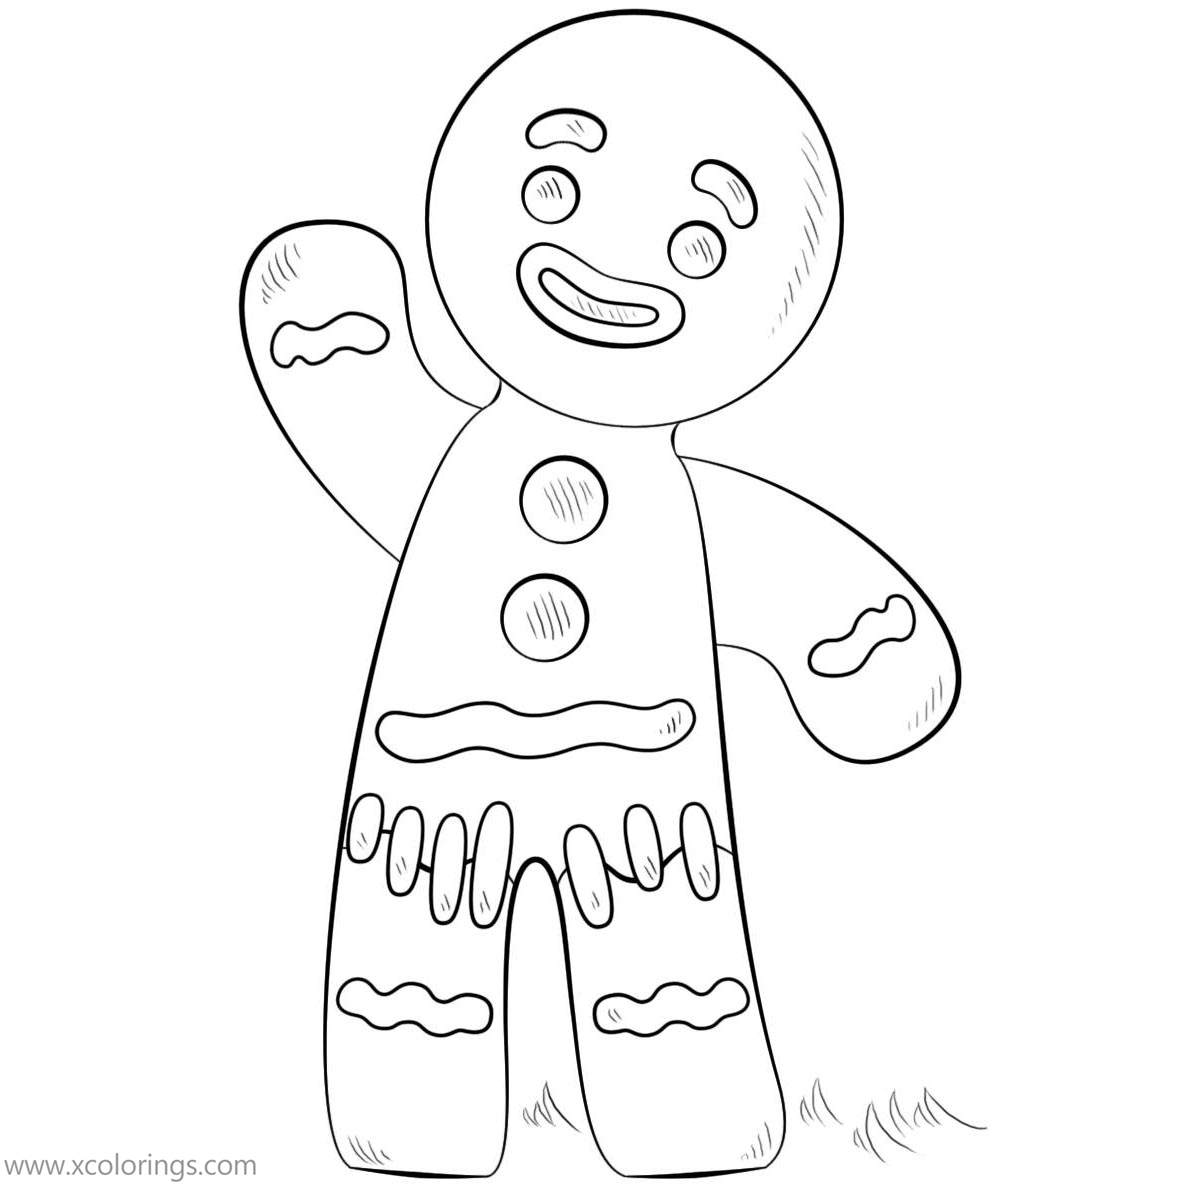 Free Gingerbread Man Coloring Pages Waving Hand printable